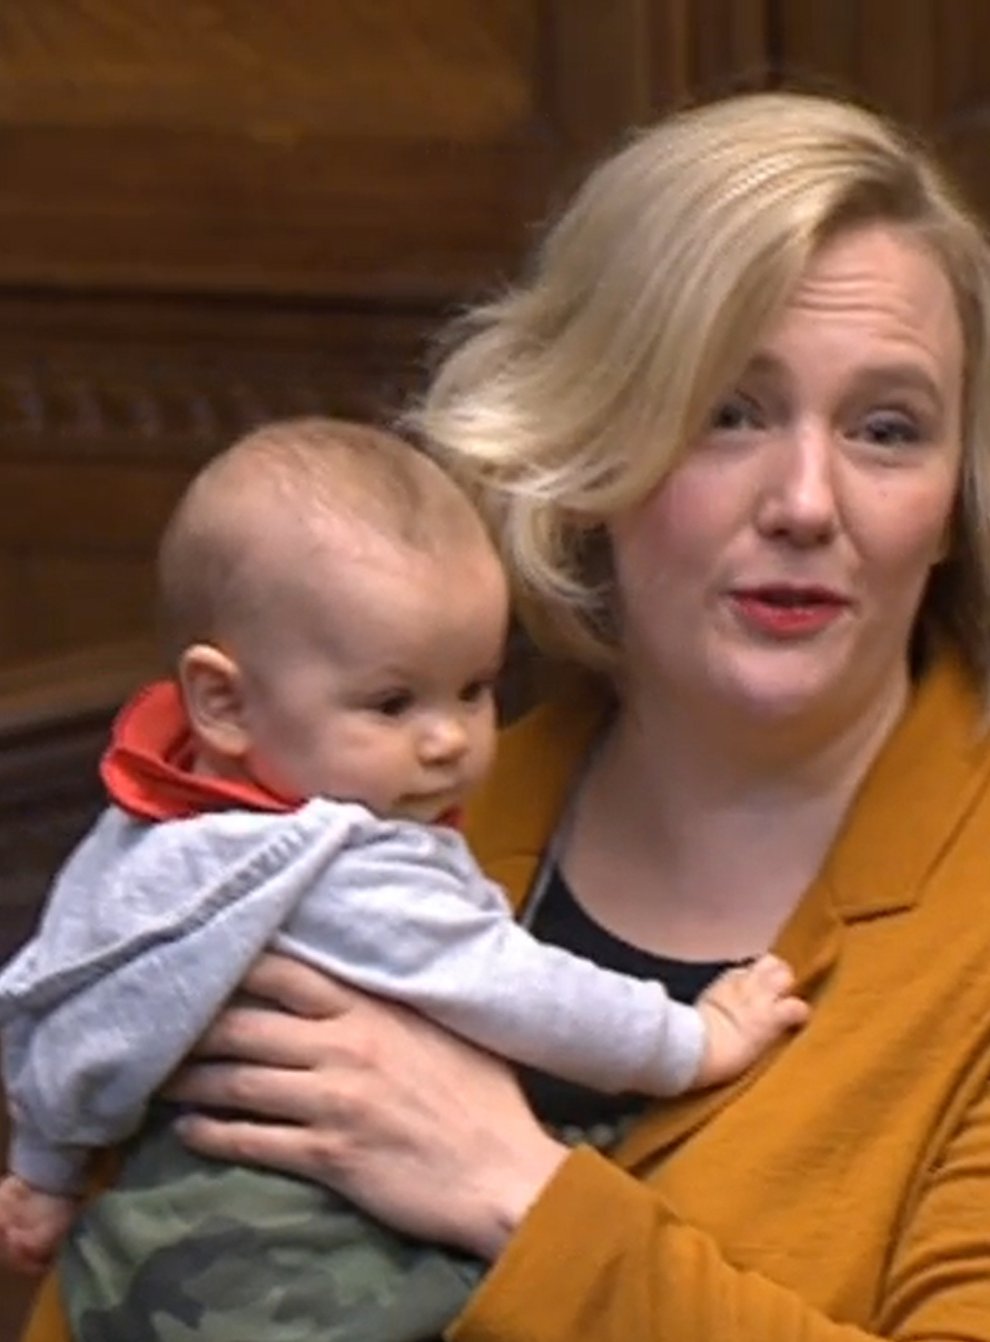 Commons Speaker Sir Lindsay Hoyle has said he is in favour of letting MPs bring their babies with them for parliamentary debates as long as they are not disrupting proceedings (House of Commons/PA)